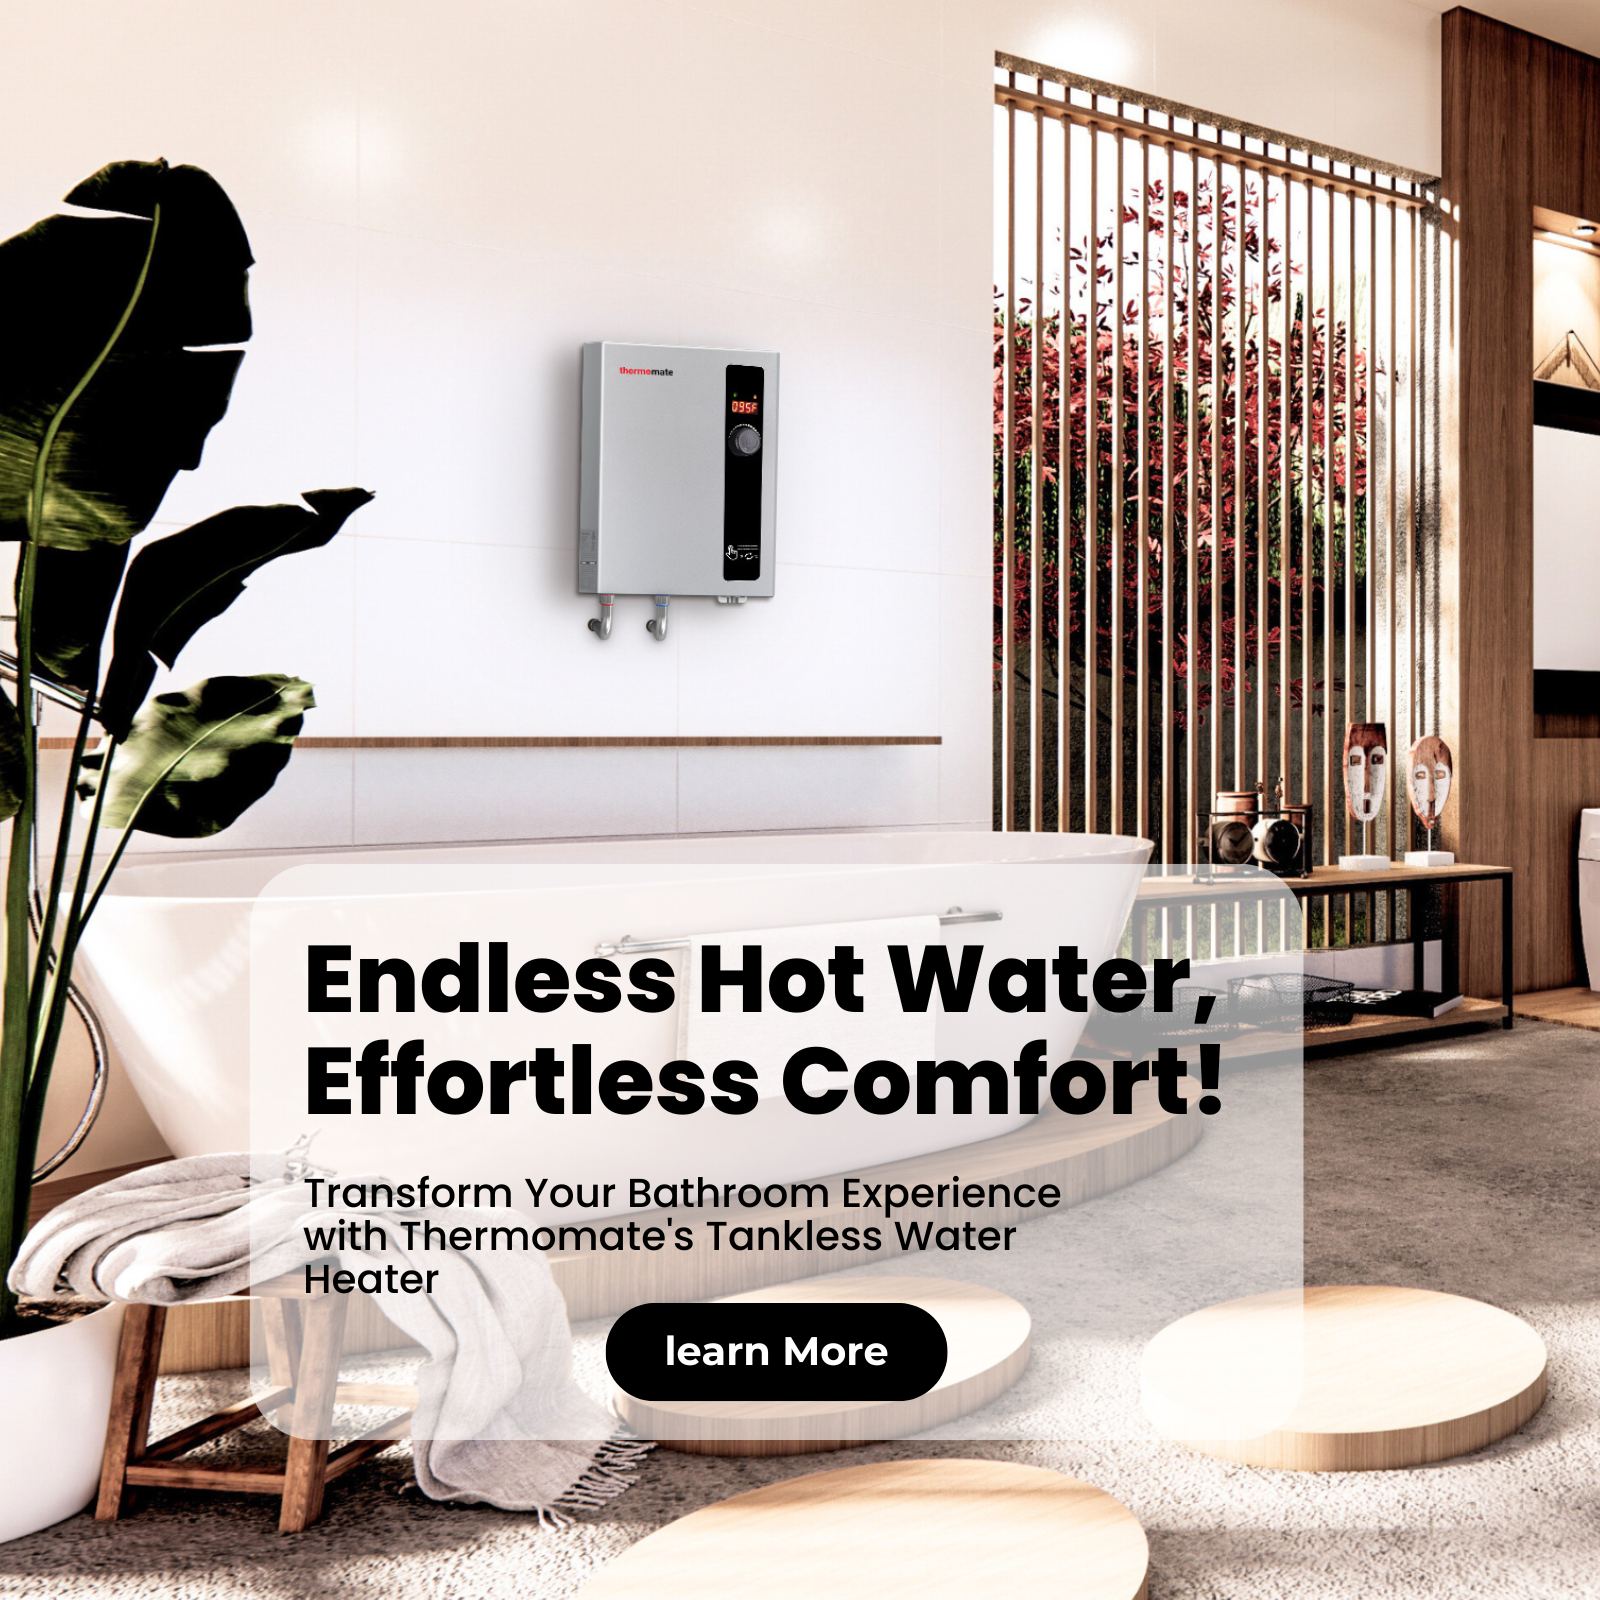 Thermomate Endless Hot Water, Effortless Comfort!